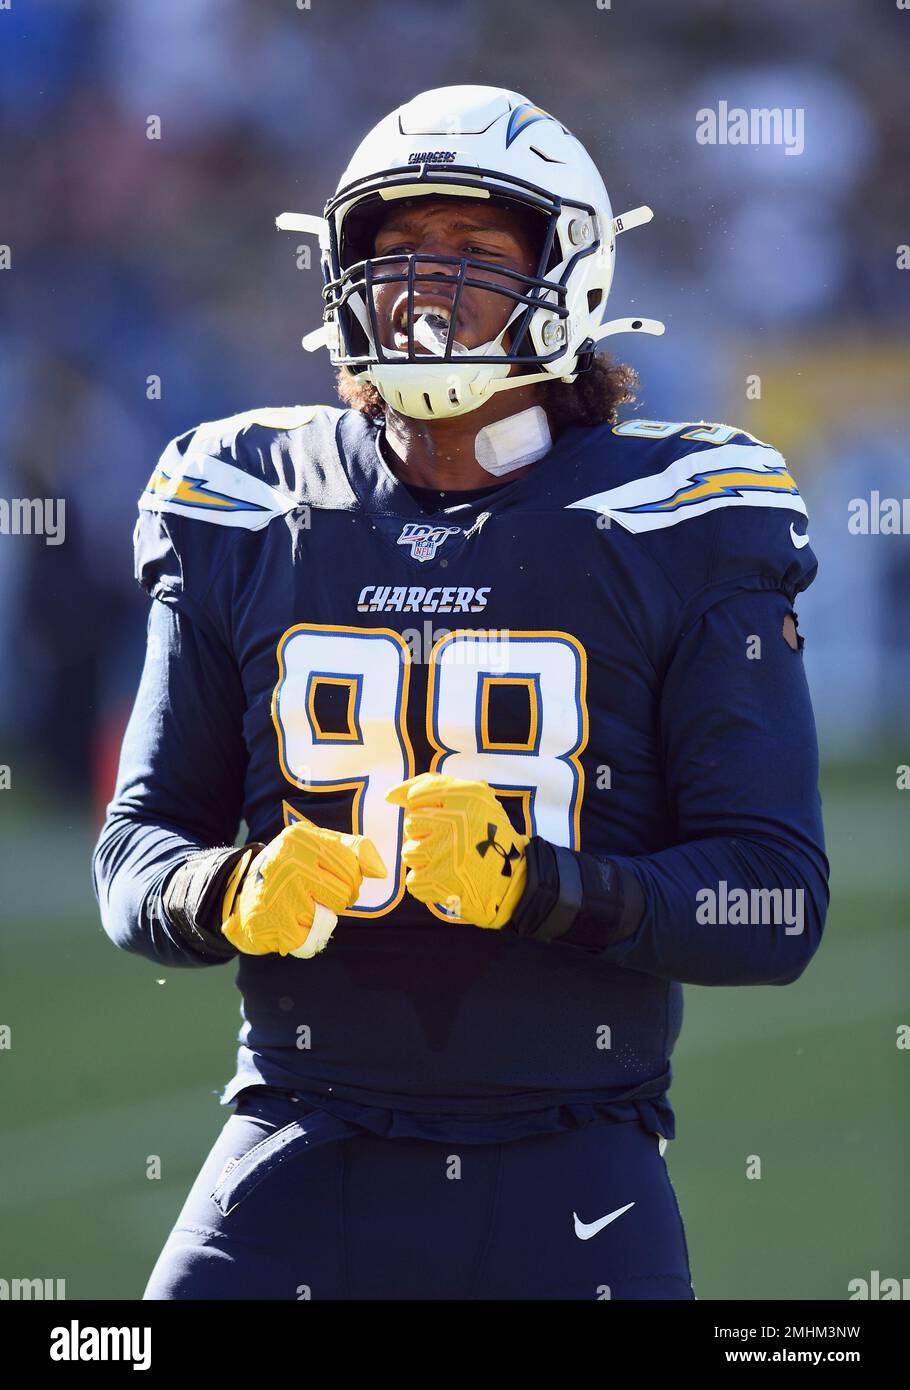 Los Angeles Chargers defensive end Isaac Rochell (98) reacts on the field  during an NFL football game against the Green Bay Packers, Sunday, November  3, 2019 in Carson, Calif. The Chargers defeated